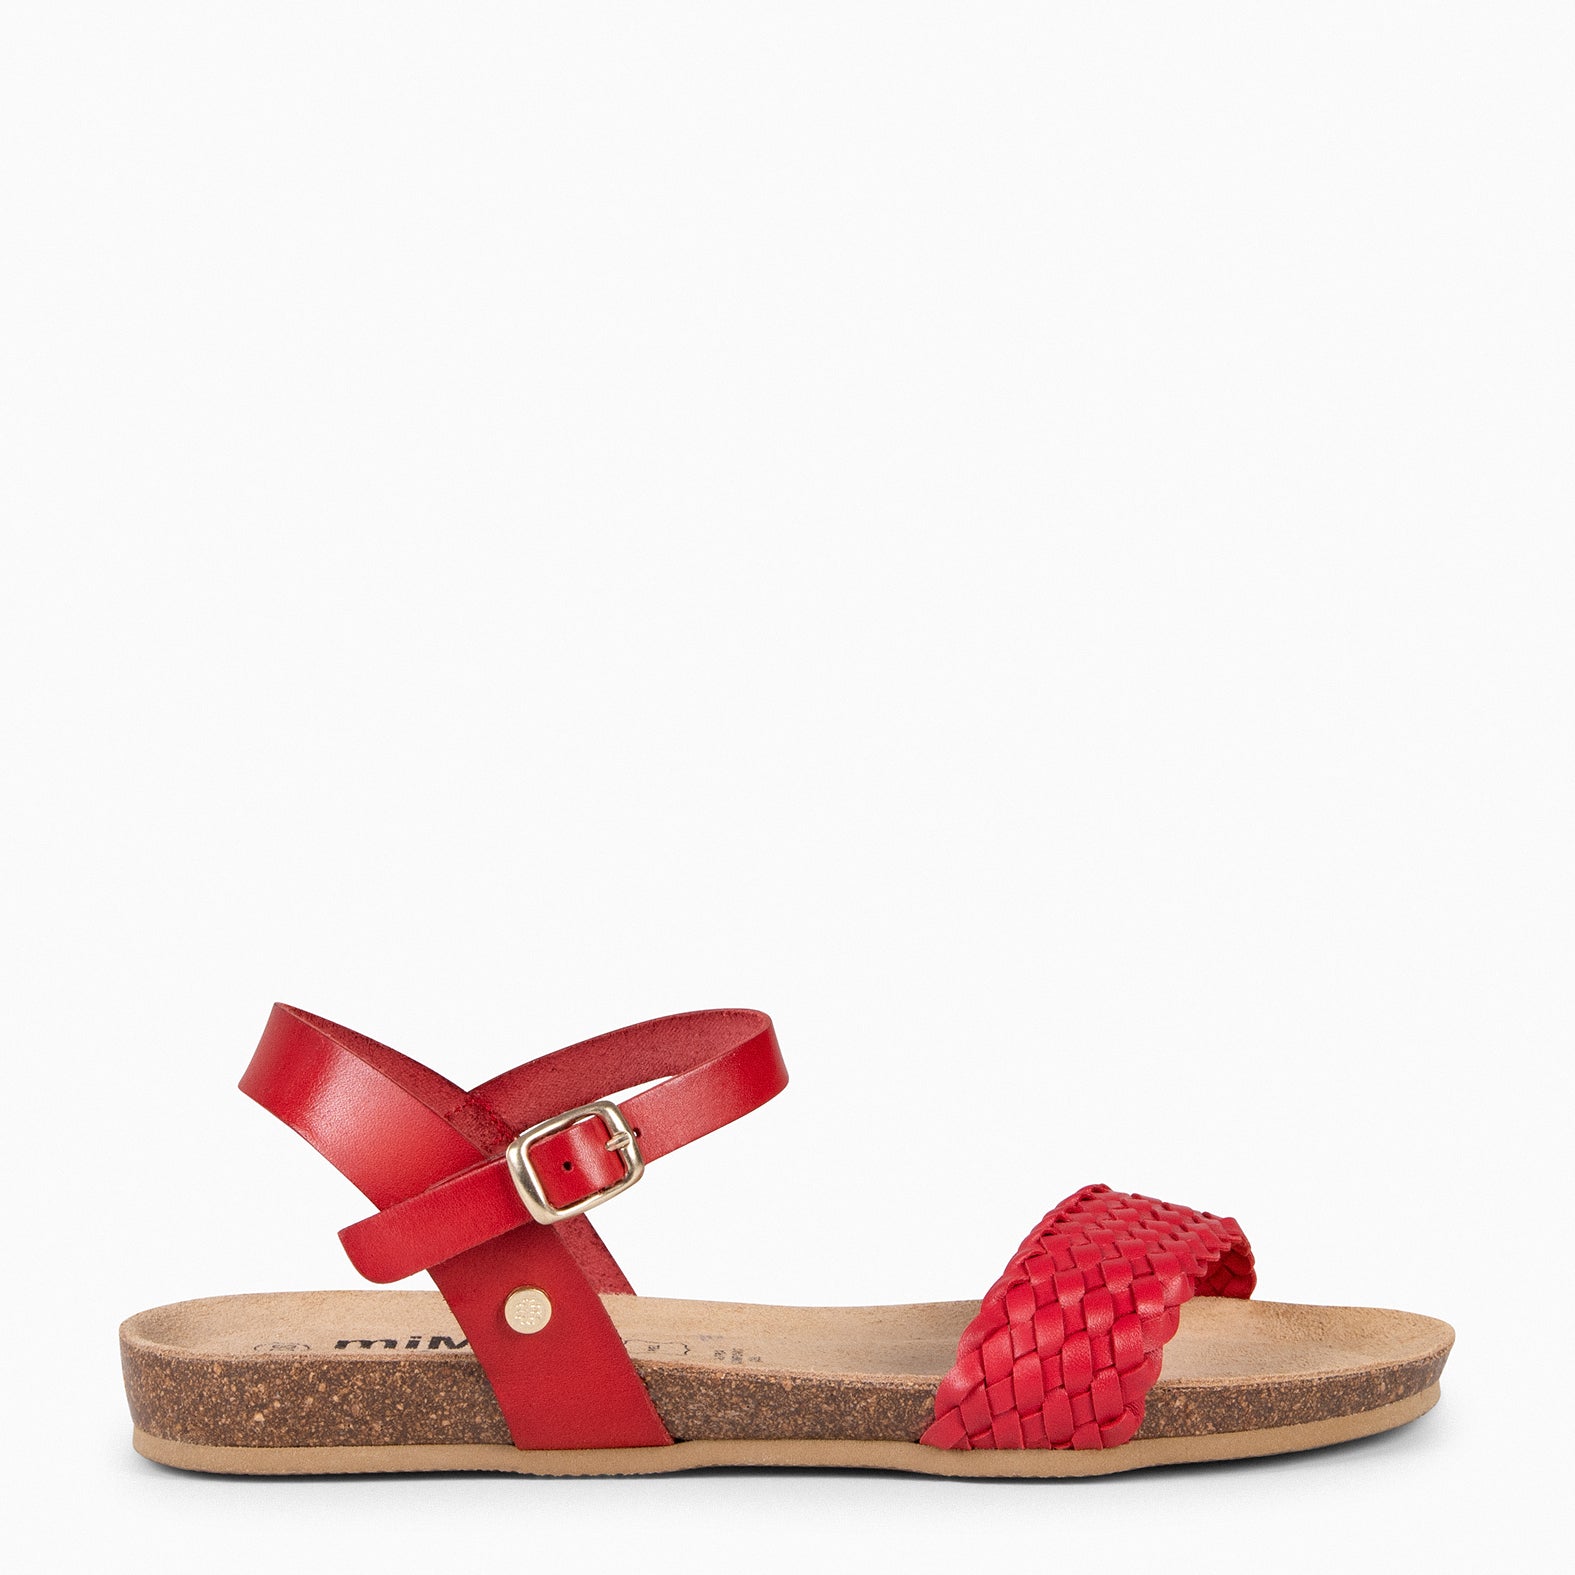 AIRE - RED BIO Flat Sandals with braided strap